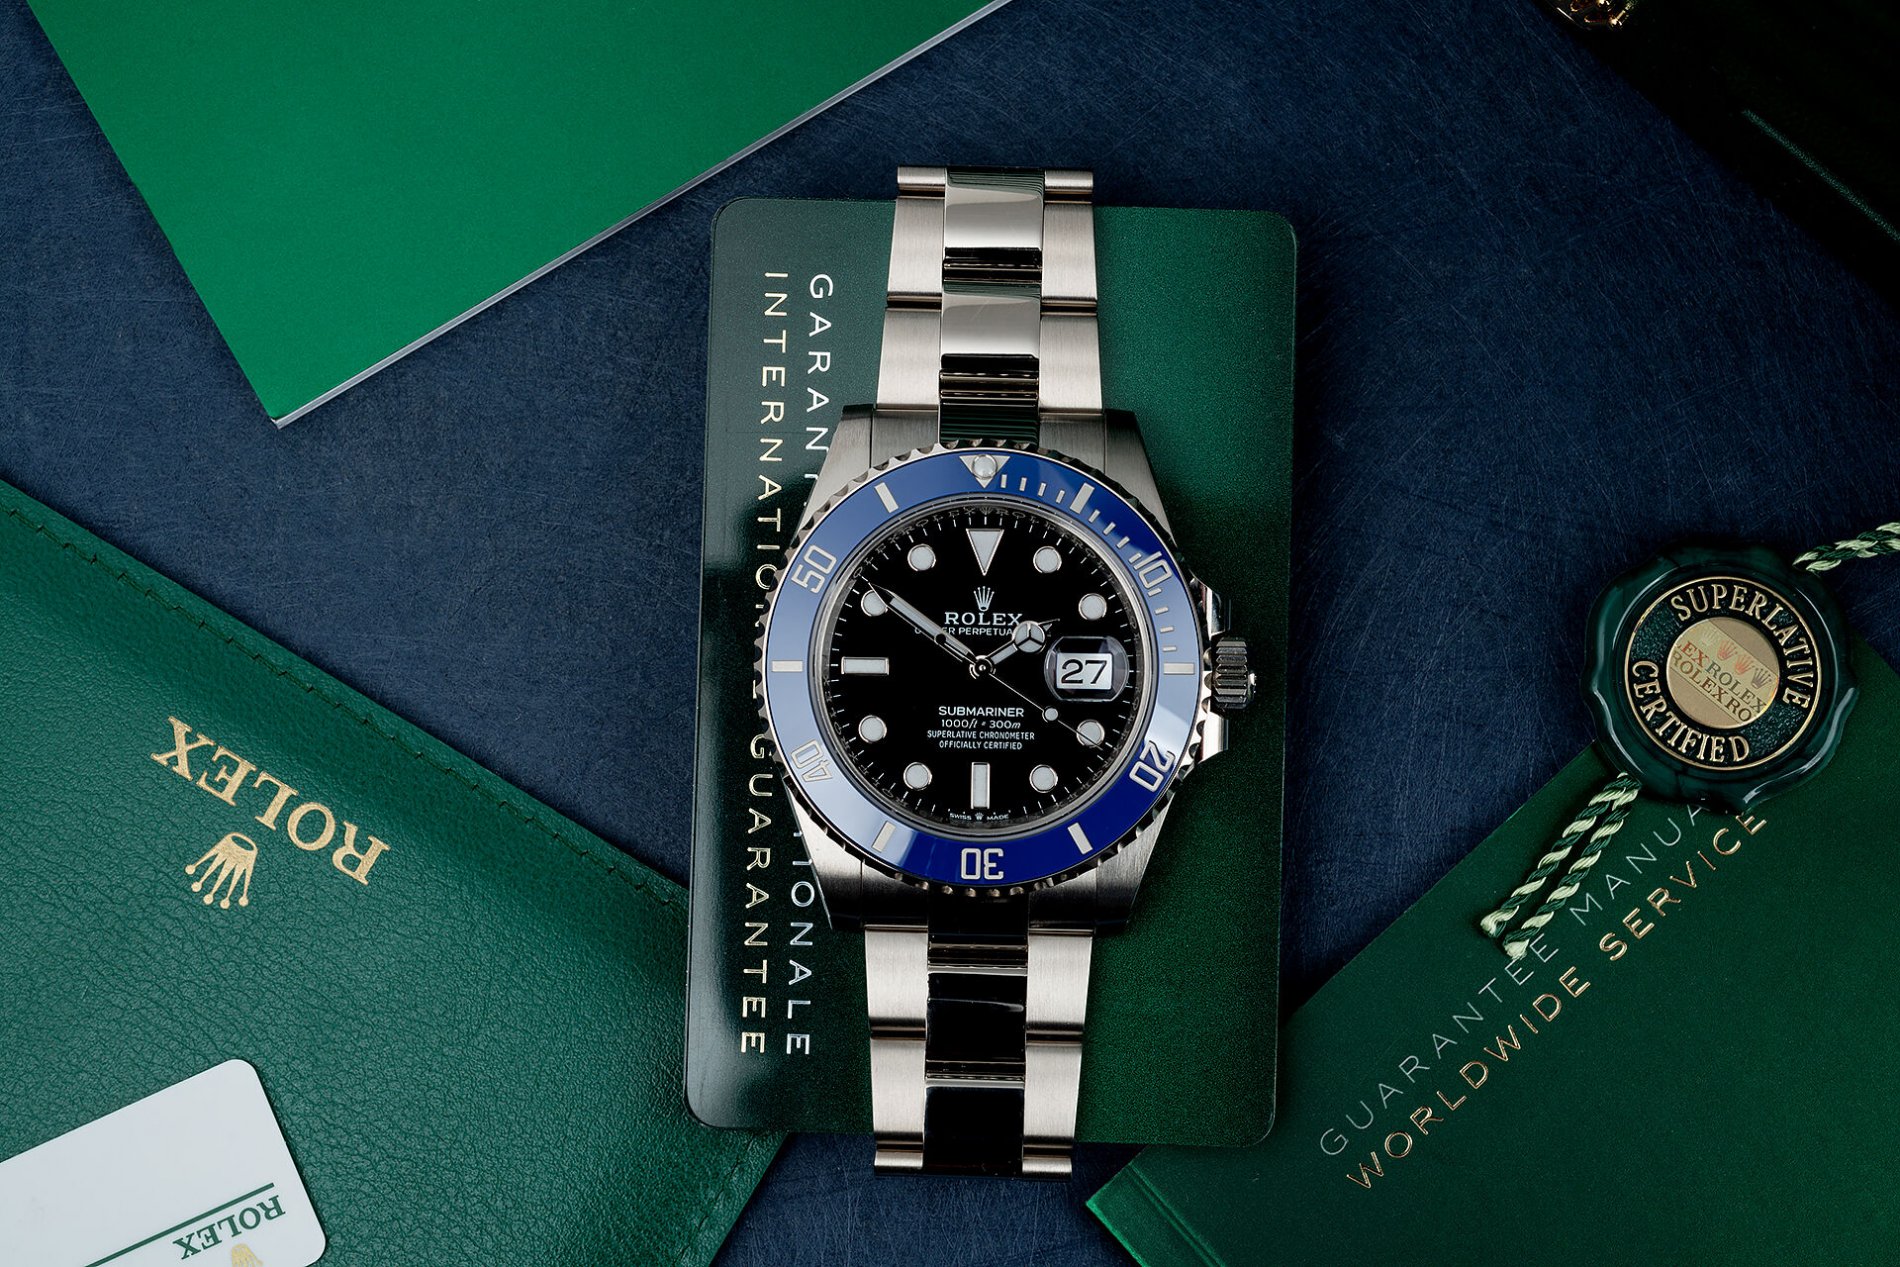 cai-can-0901000001-rolex-submariner-brand-new-white-gold-ref-126619lb-year-2021-14484-199.jpeg